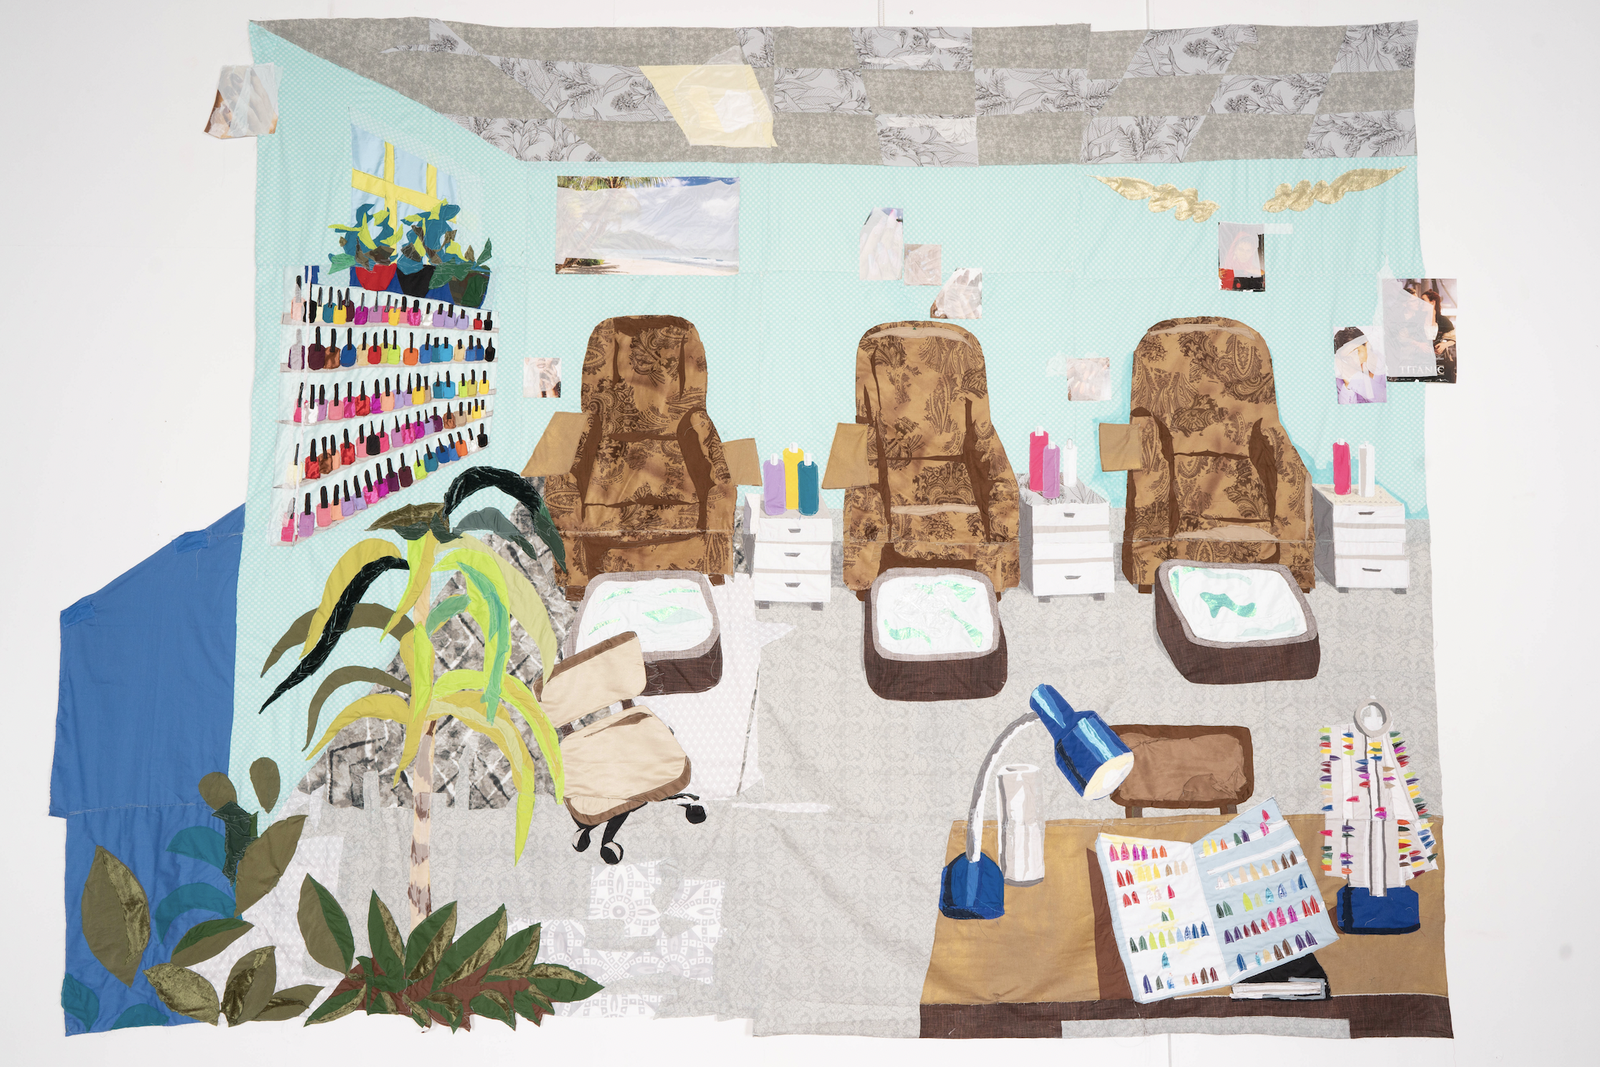 Hangama Amiri, Sahar, Nail Salon #1 (detail), 2020. Cotton, chiffon, muslin, silk, suede, paper, clear plastic, inkjet prints on paper, marker, polyester, and found fabric, 289.14 x 387.35 cm (111 x 152.5 in)Courtesy of the artist and T293 Gallery.